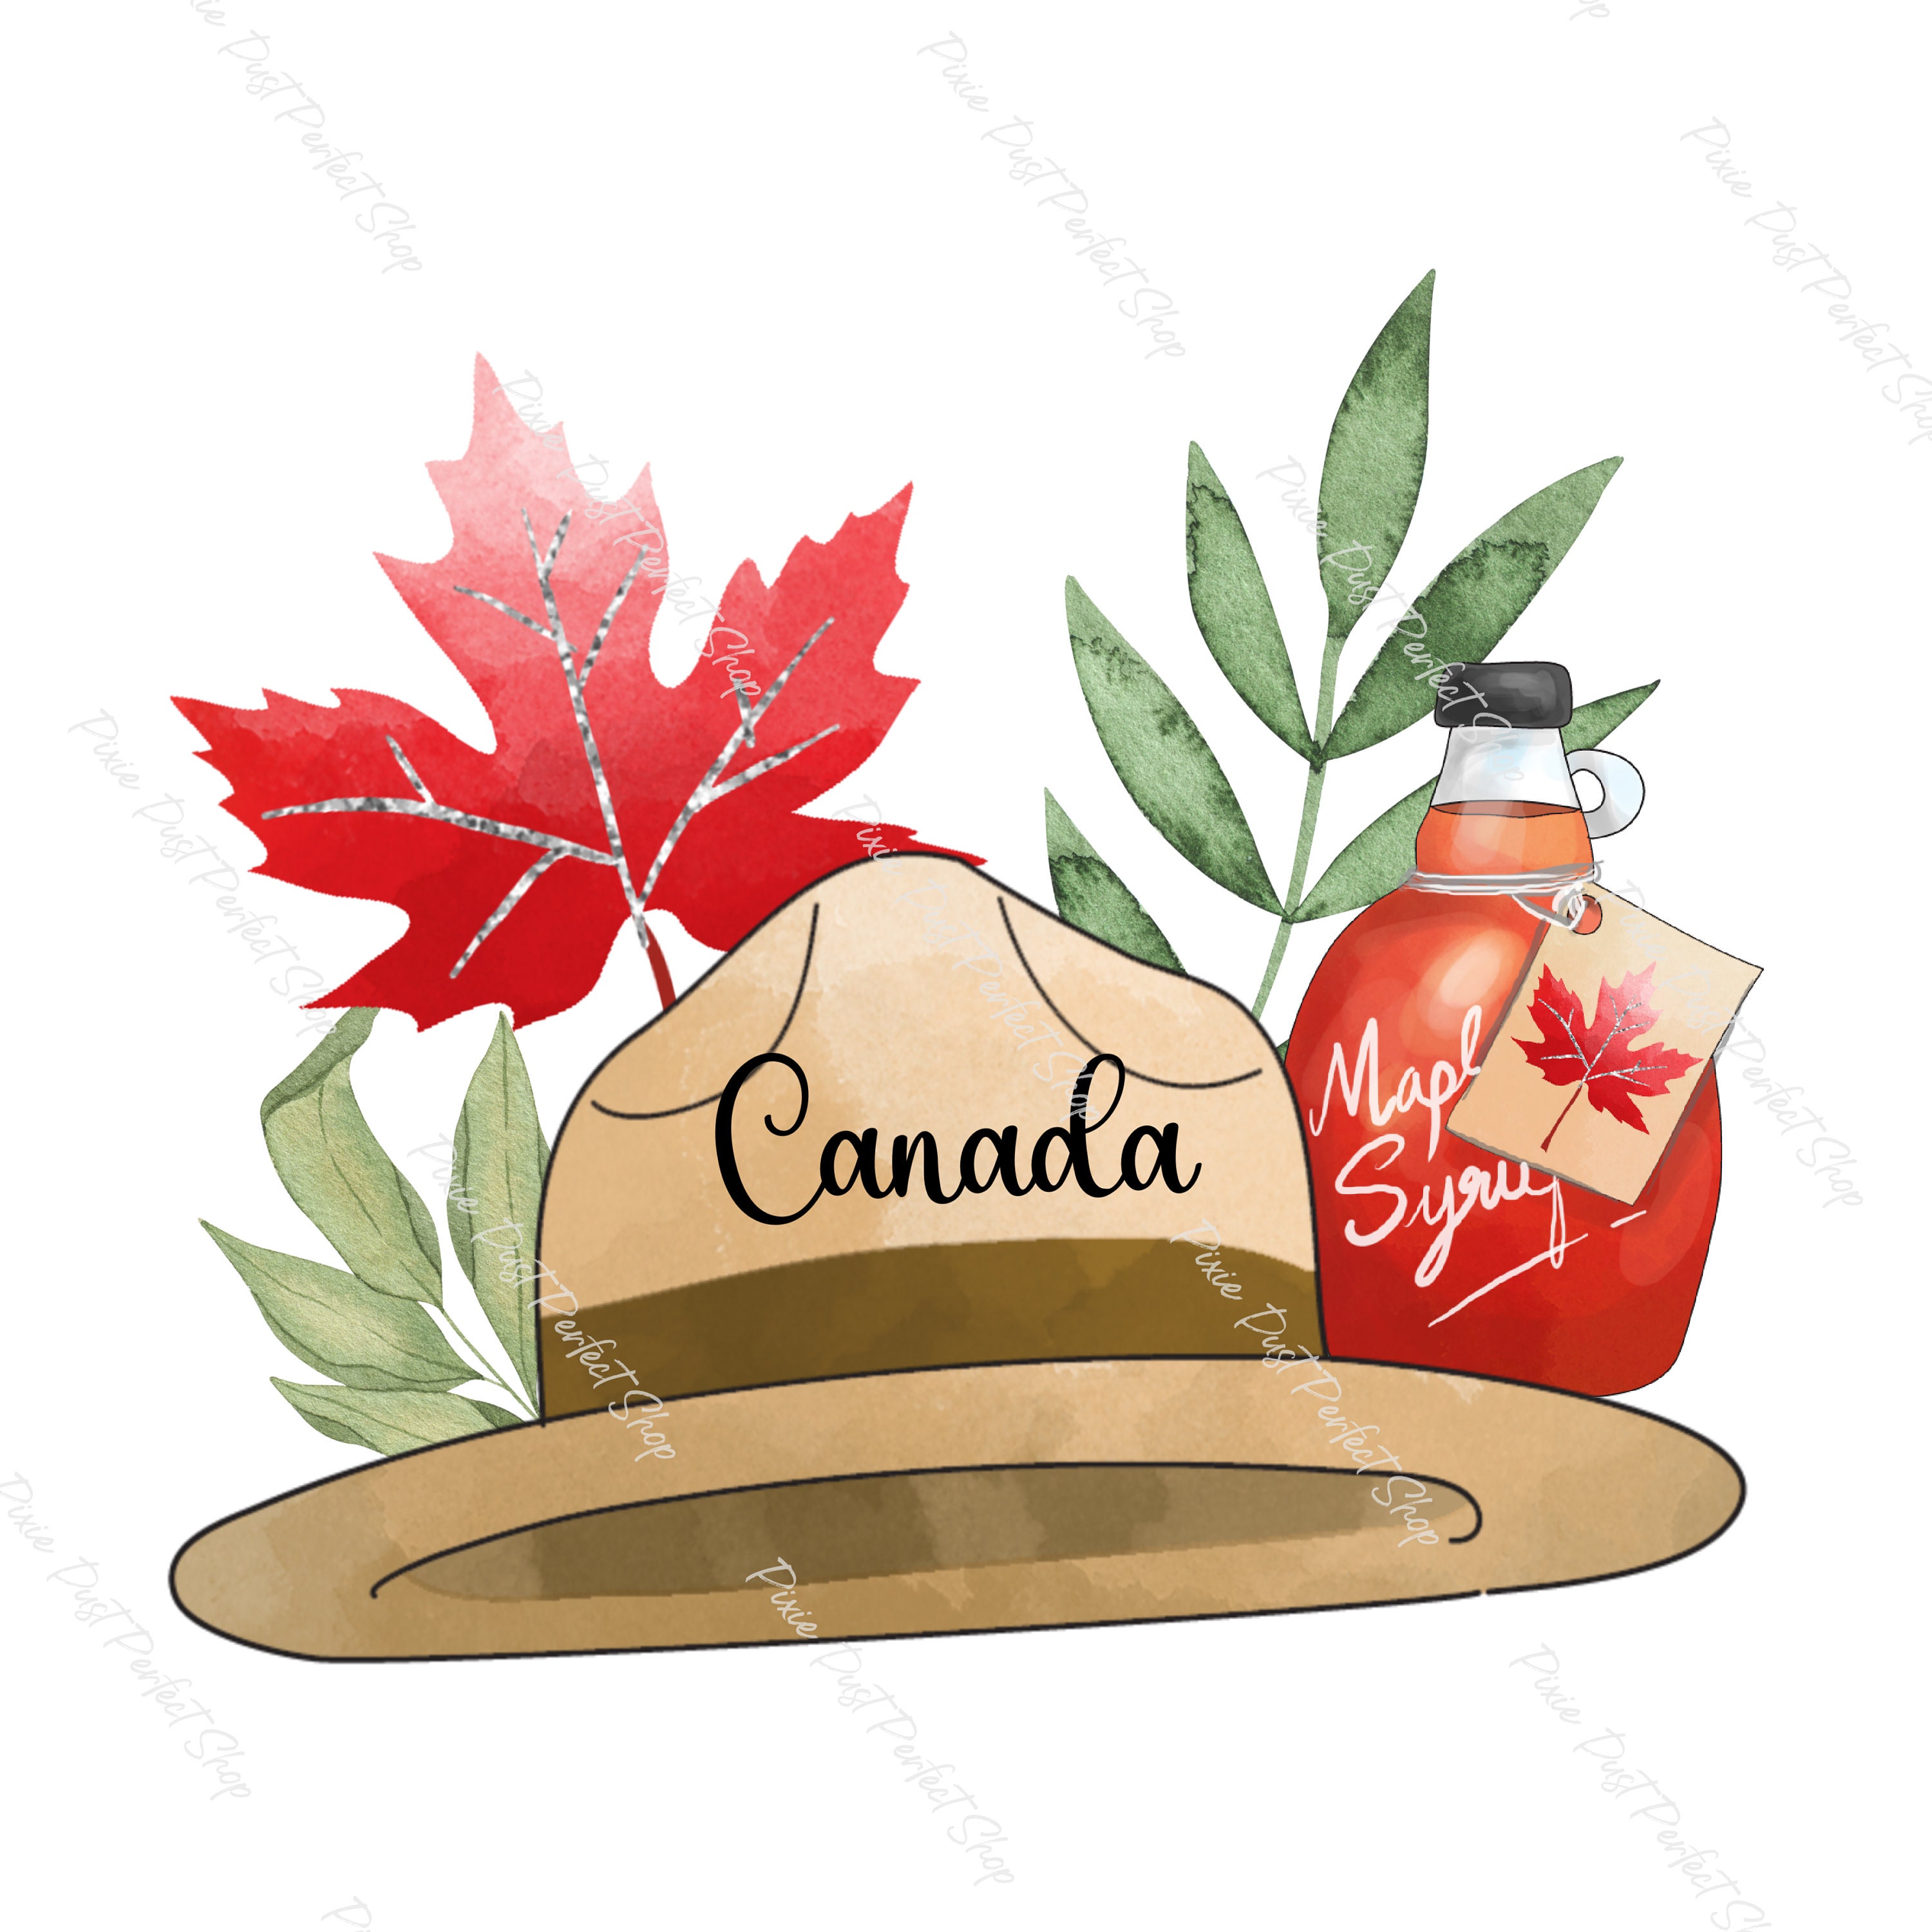 Canada Day, Hat, Maple Syrup, Maple Leaf, Canadian, Flag, Celebrate, July  1st, Instant Digital Download Clipart, 300 dpi, PNG Graphic